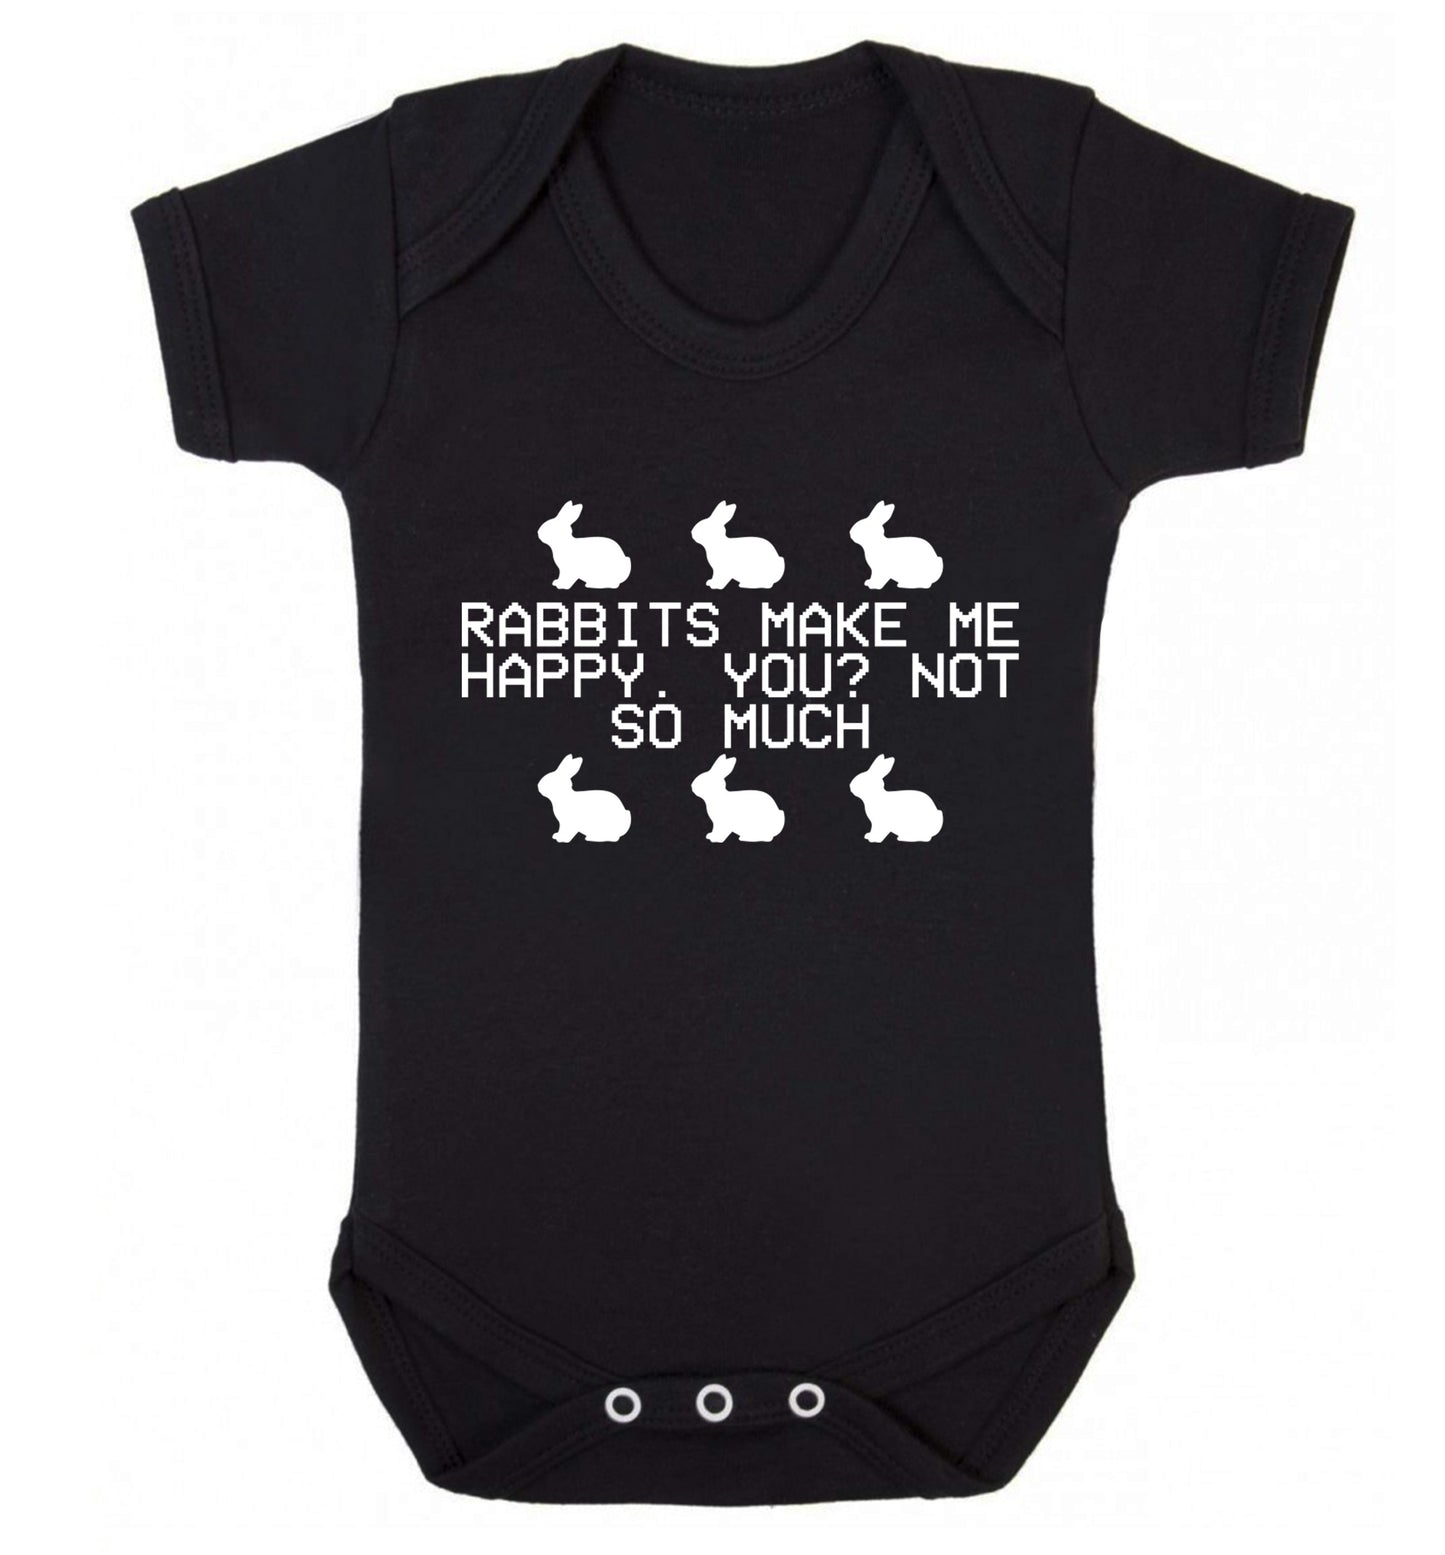 Rabbits make me happy, you not so much Baby Vest black 18-24 months